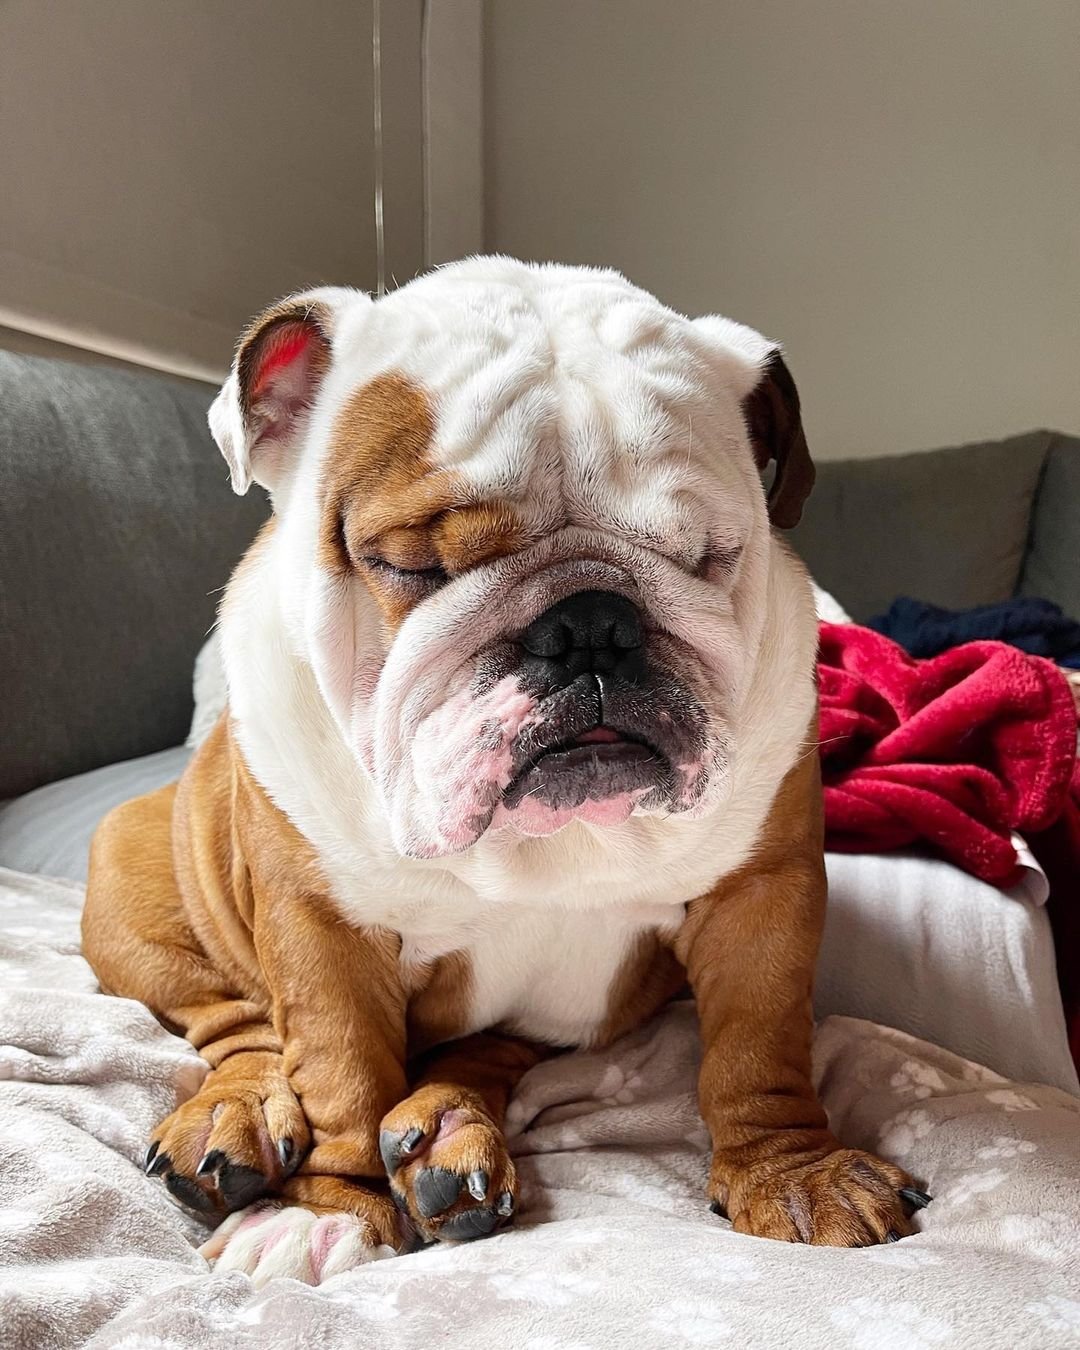 When you had too much fun last night but have to go to work the next day 😴🥱 

📸: @bigbullyythor

#EvolvePets #ChooseEvolve #SnoozeButton💤